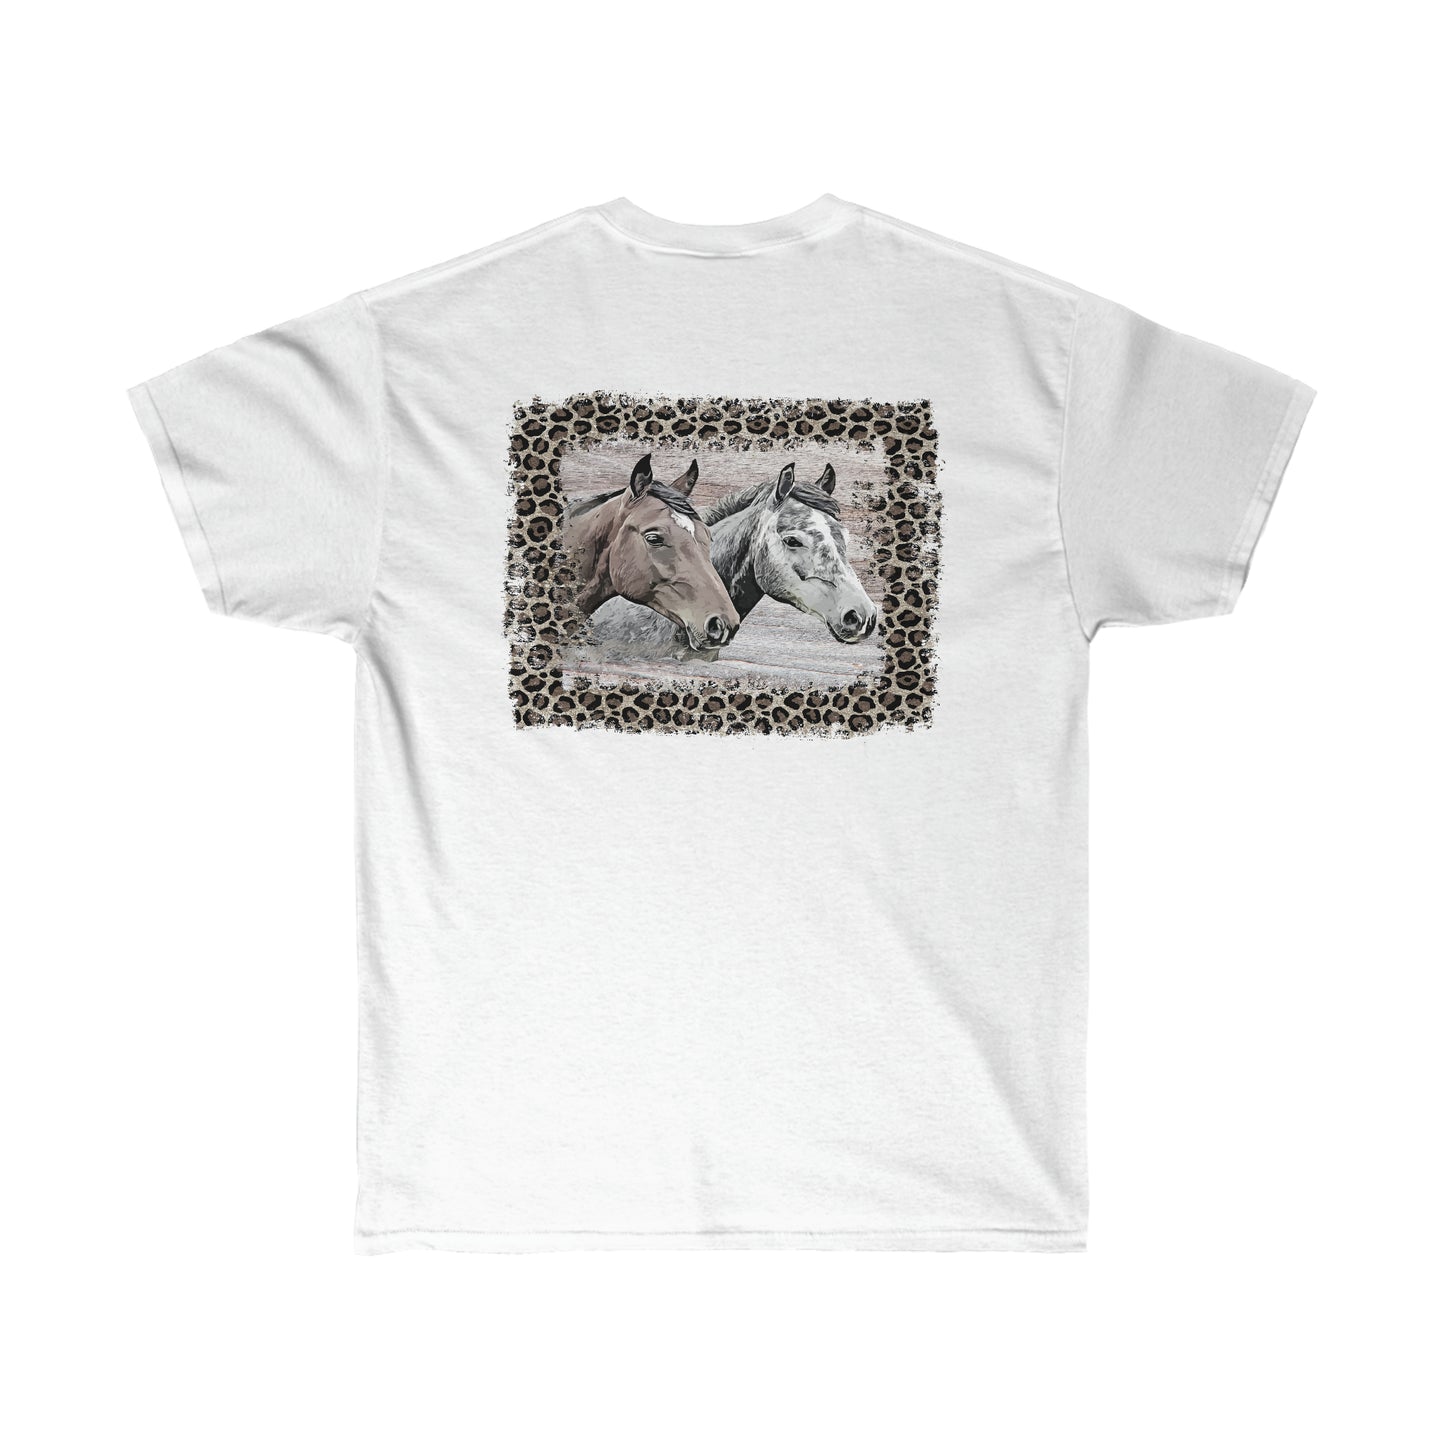 NEW!!! Leopard Horse Rustic Redfish Co. Branded Tee's